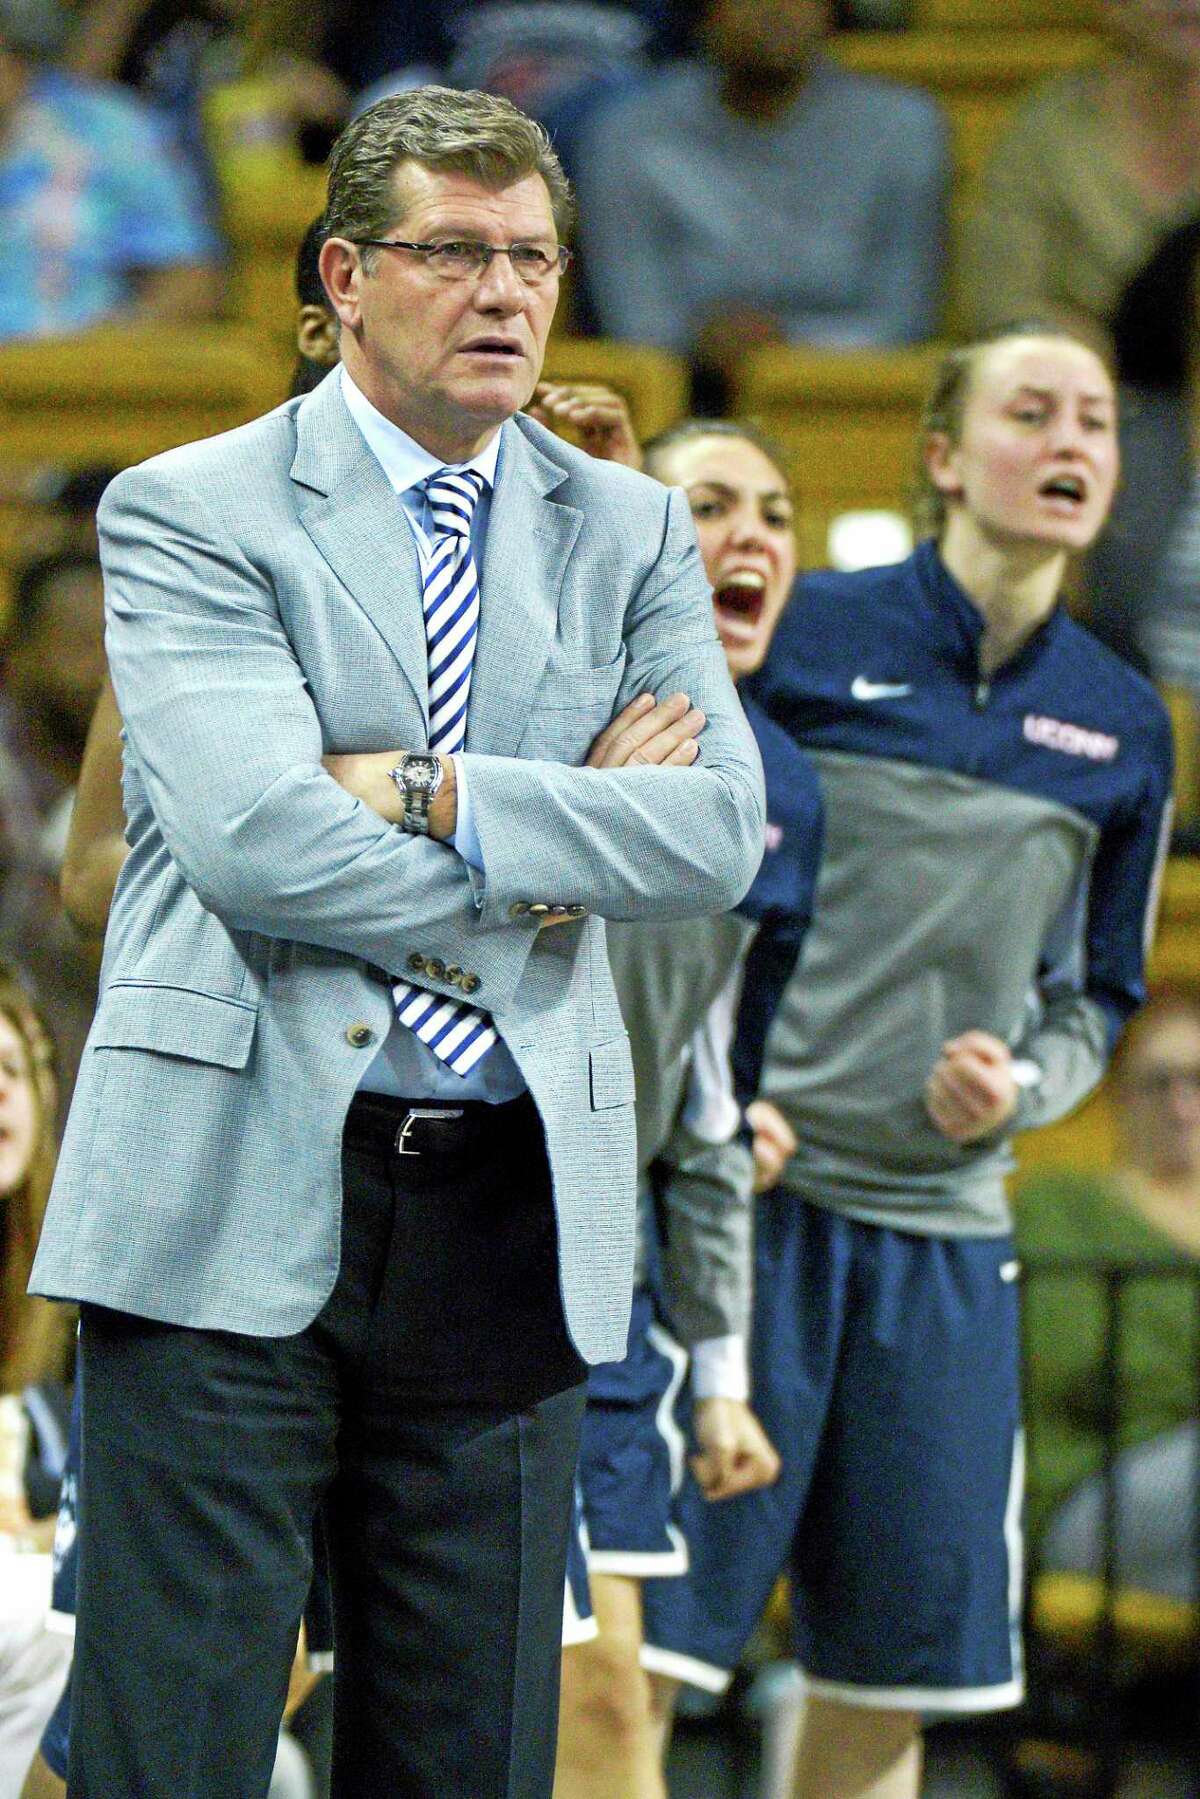 UConn coach Geno Auriemma, left, has awarded scholarships to walk-ons Briana Pulido, center, and Ansonia’s Tierney Lawlor, right.